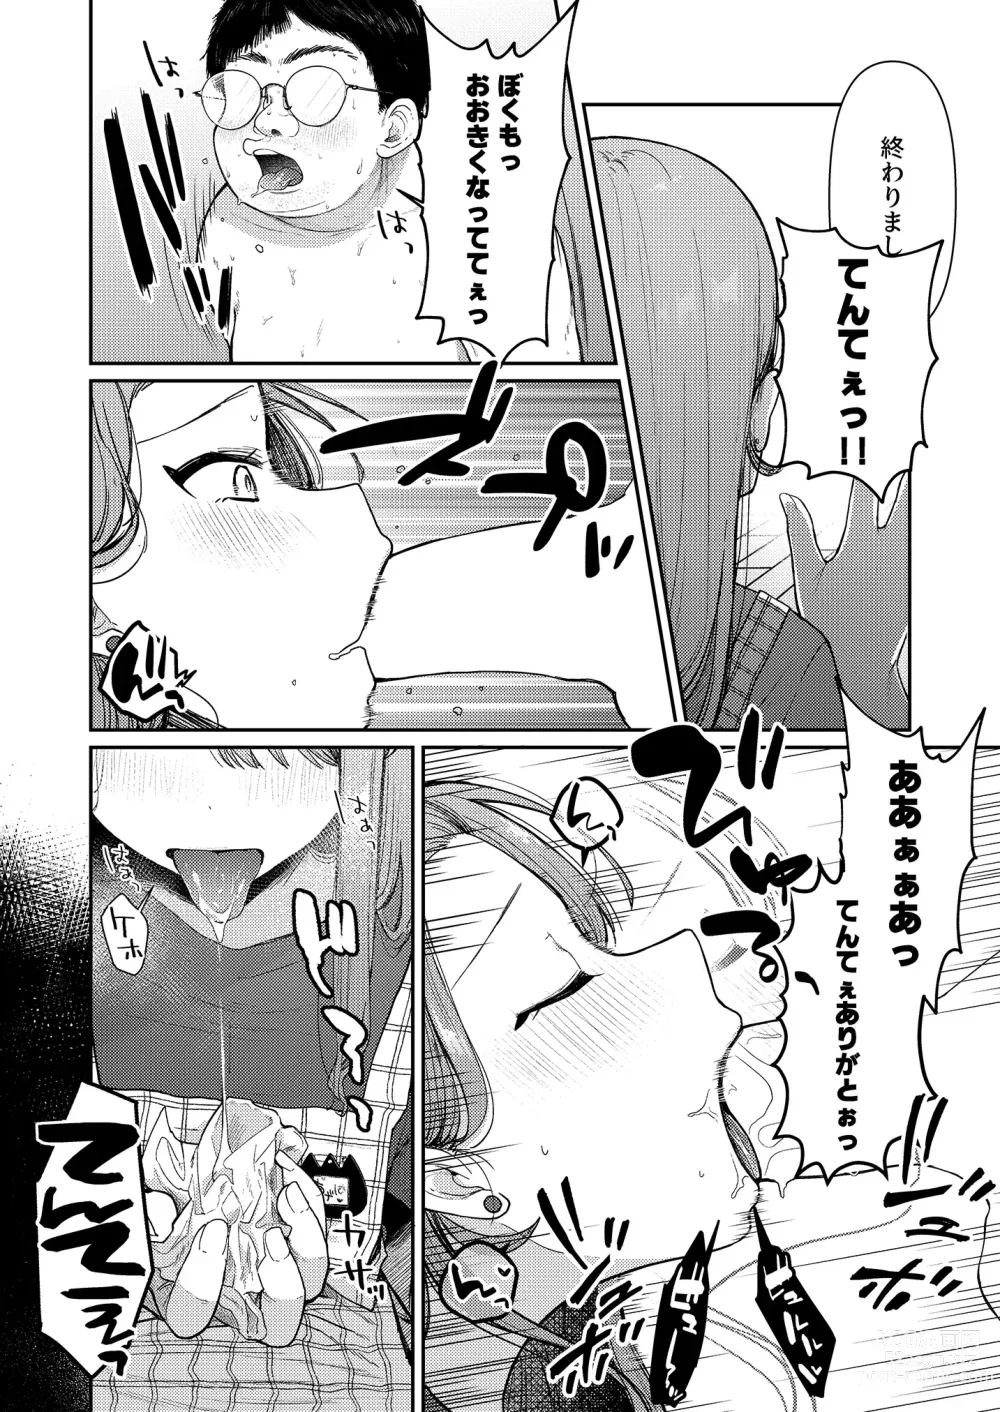 Page 8 of doujinshi Ageha tente to issho